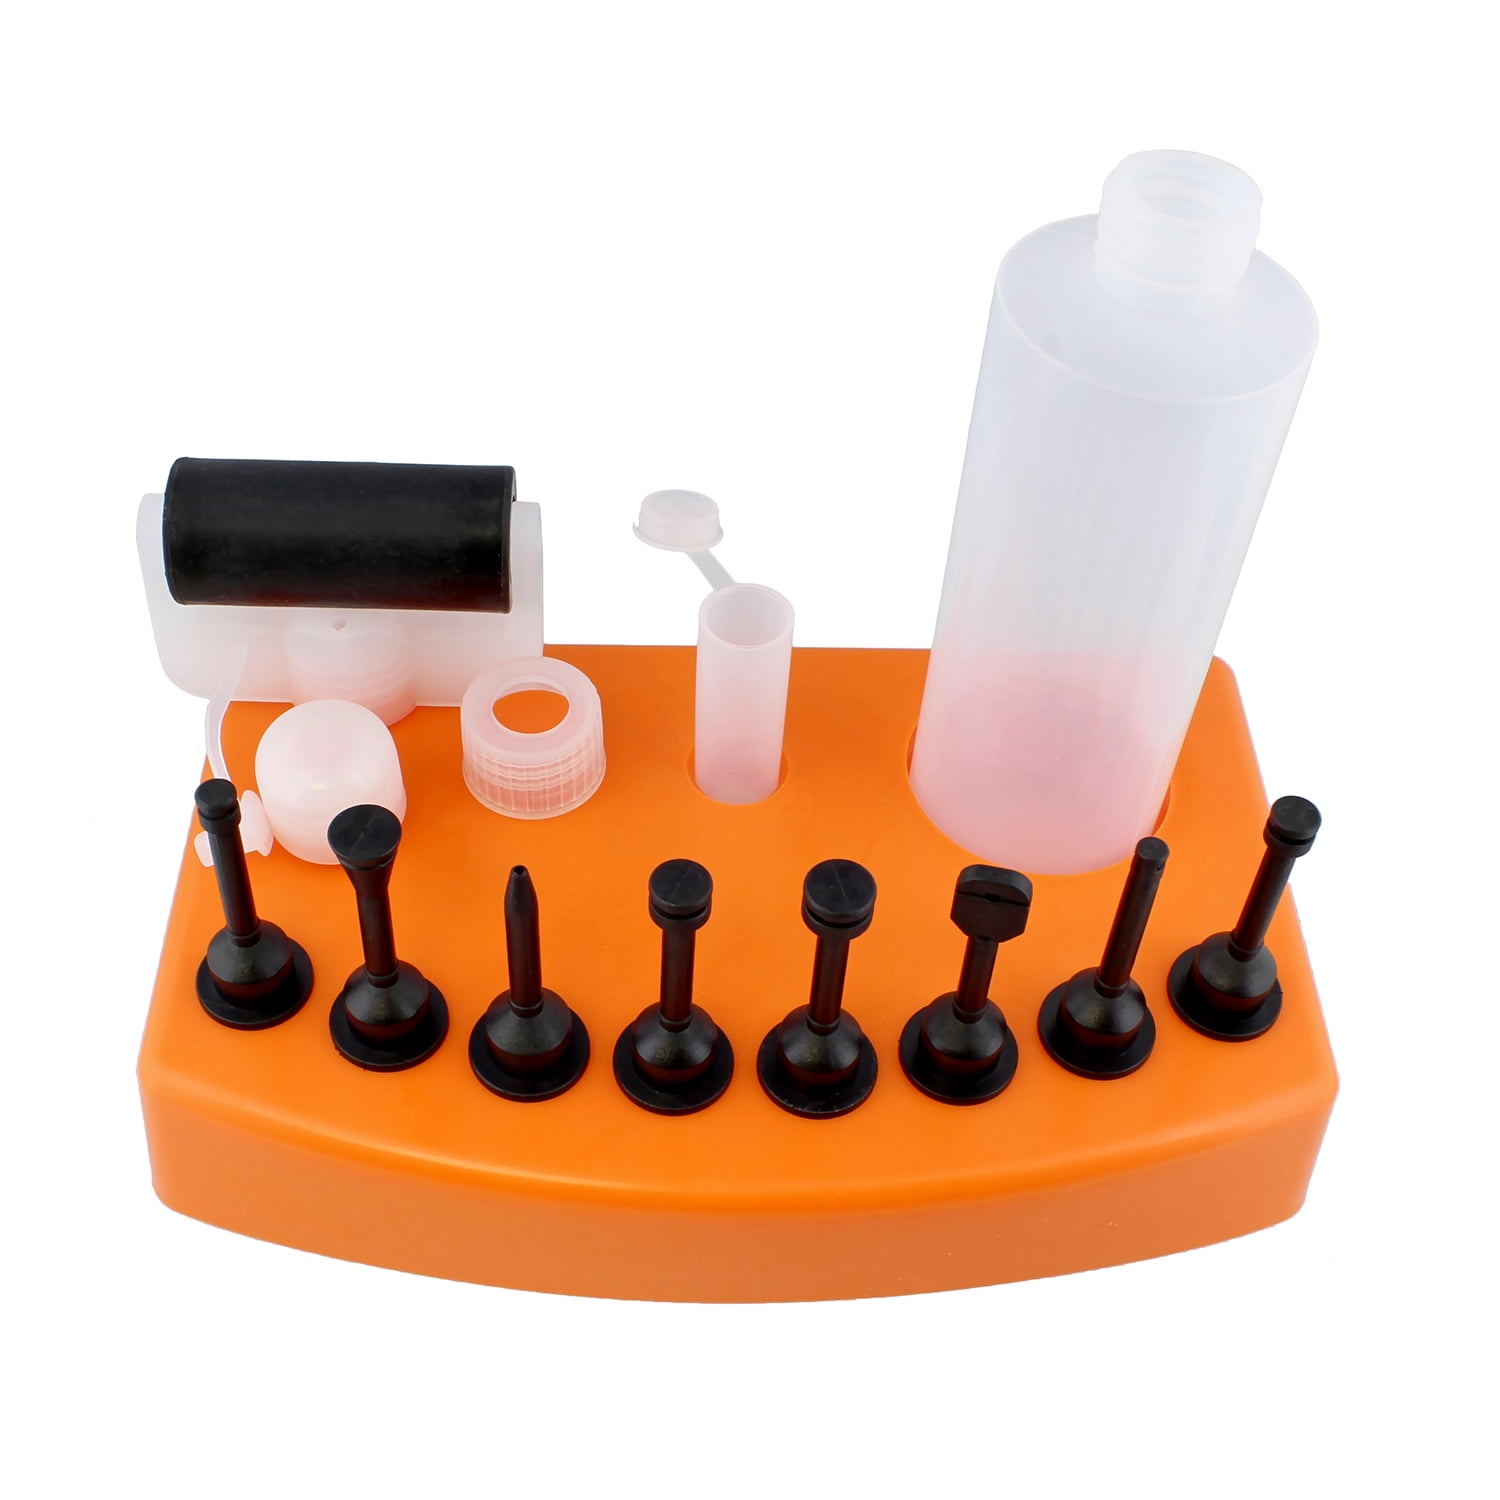 Mibro - 8 oz Woodworkers Glue Bottle and Applicator Kit